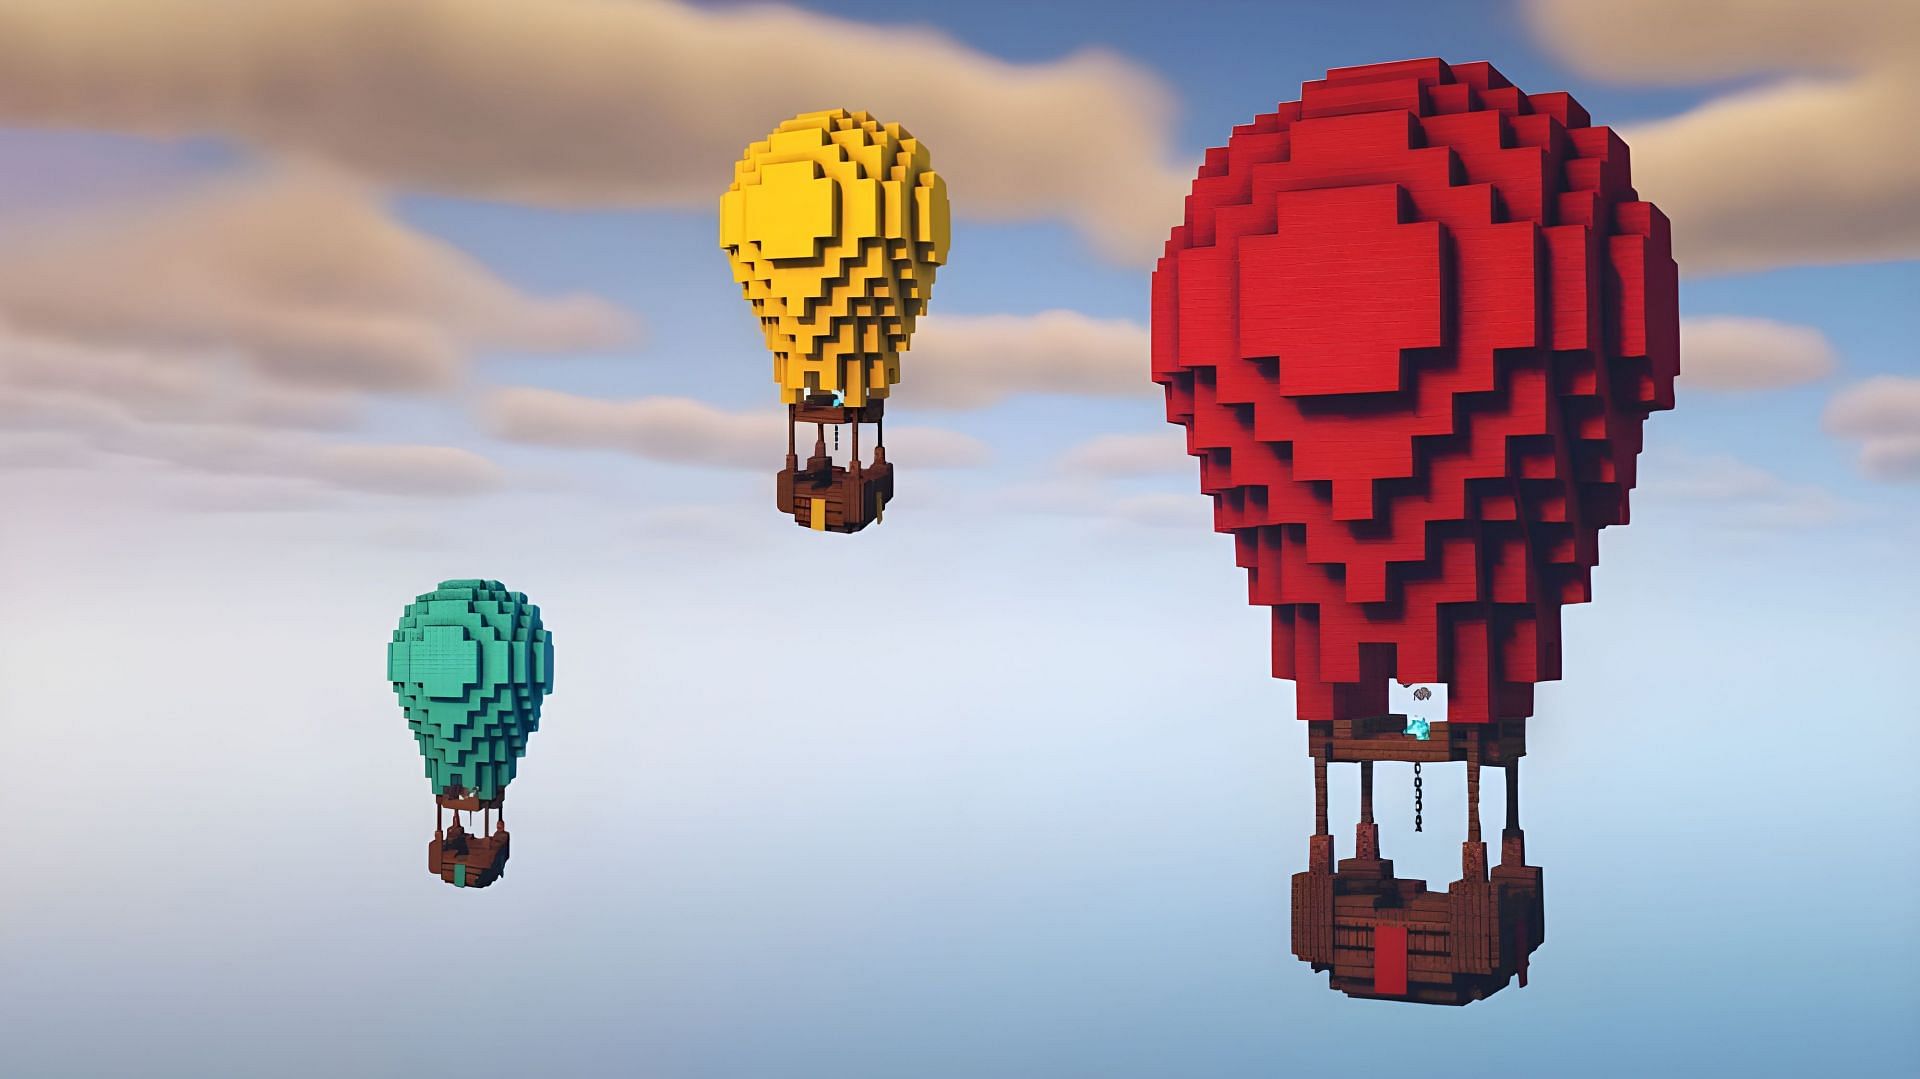 Hot air balloon builds make looking up at the sky especially beautiful (Image via Youtube/Kwell)